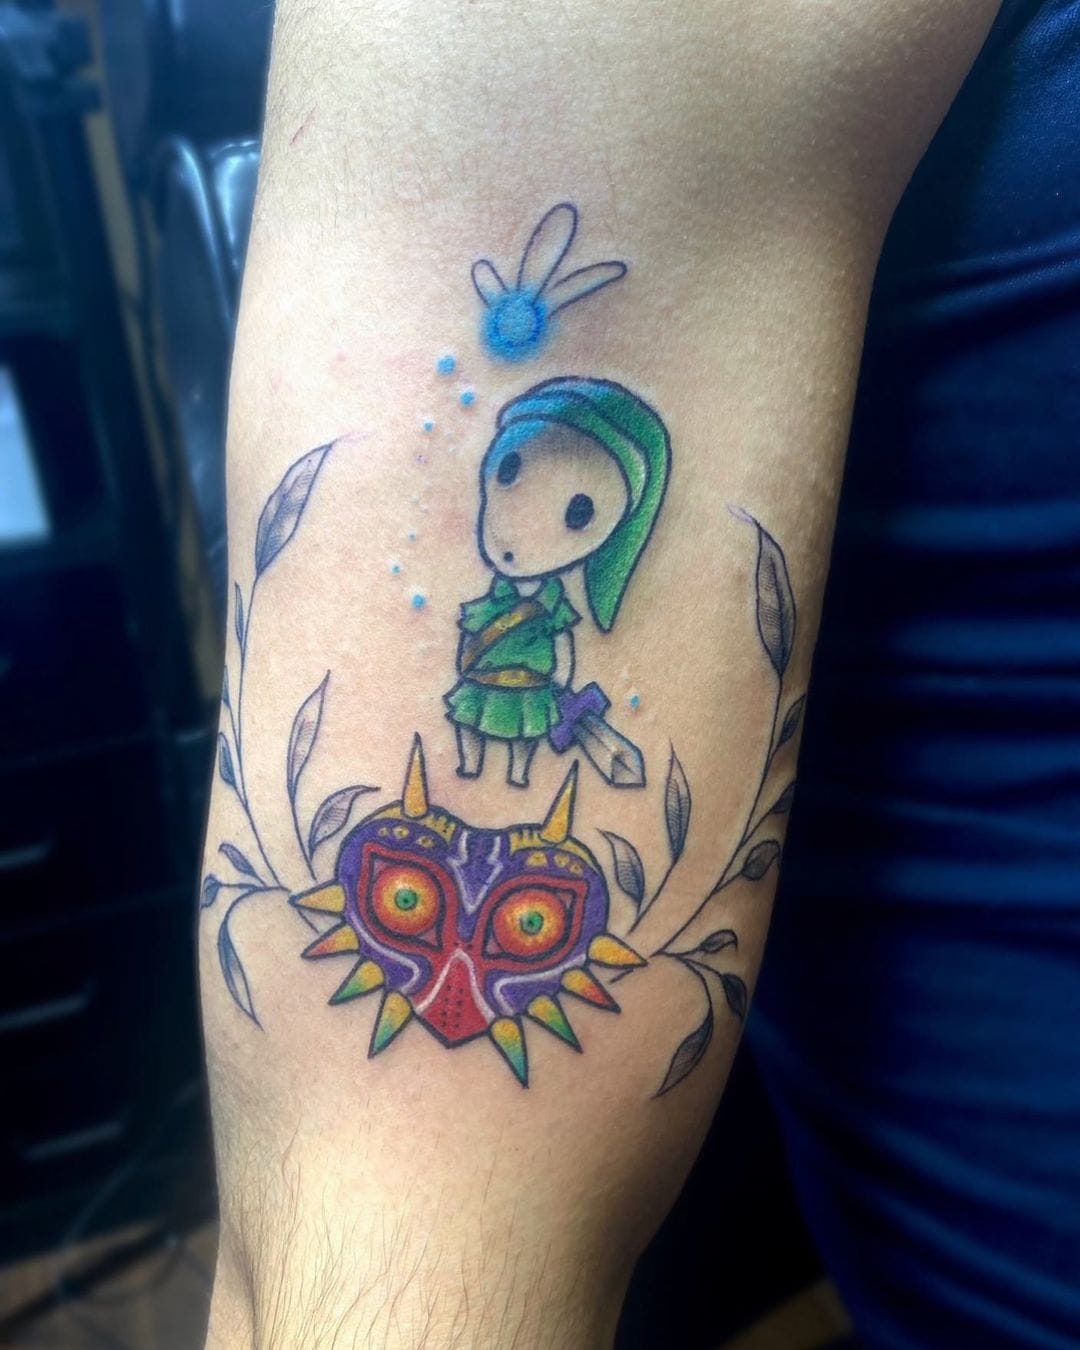 Zelda Tattoos: A Journey Through Art and Gaming